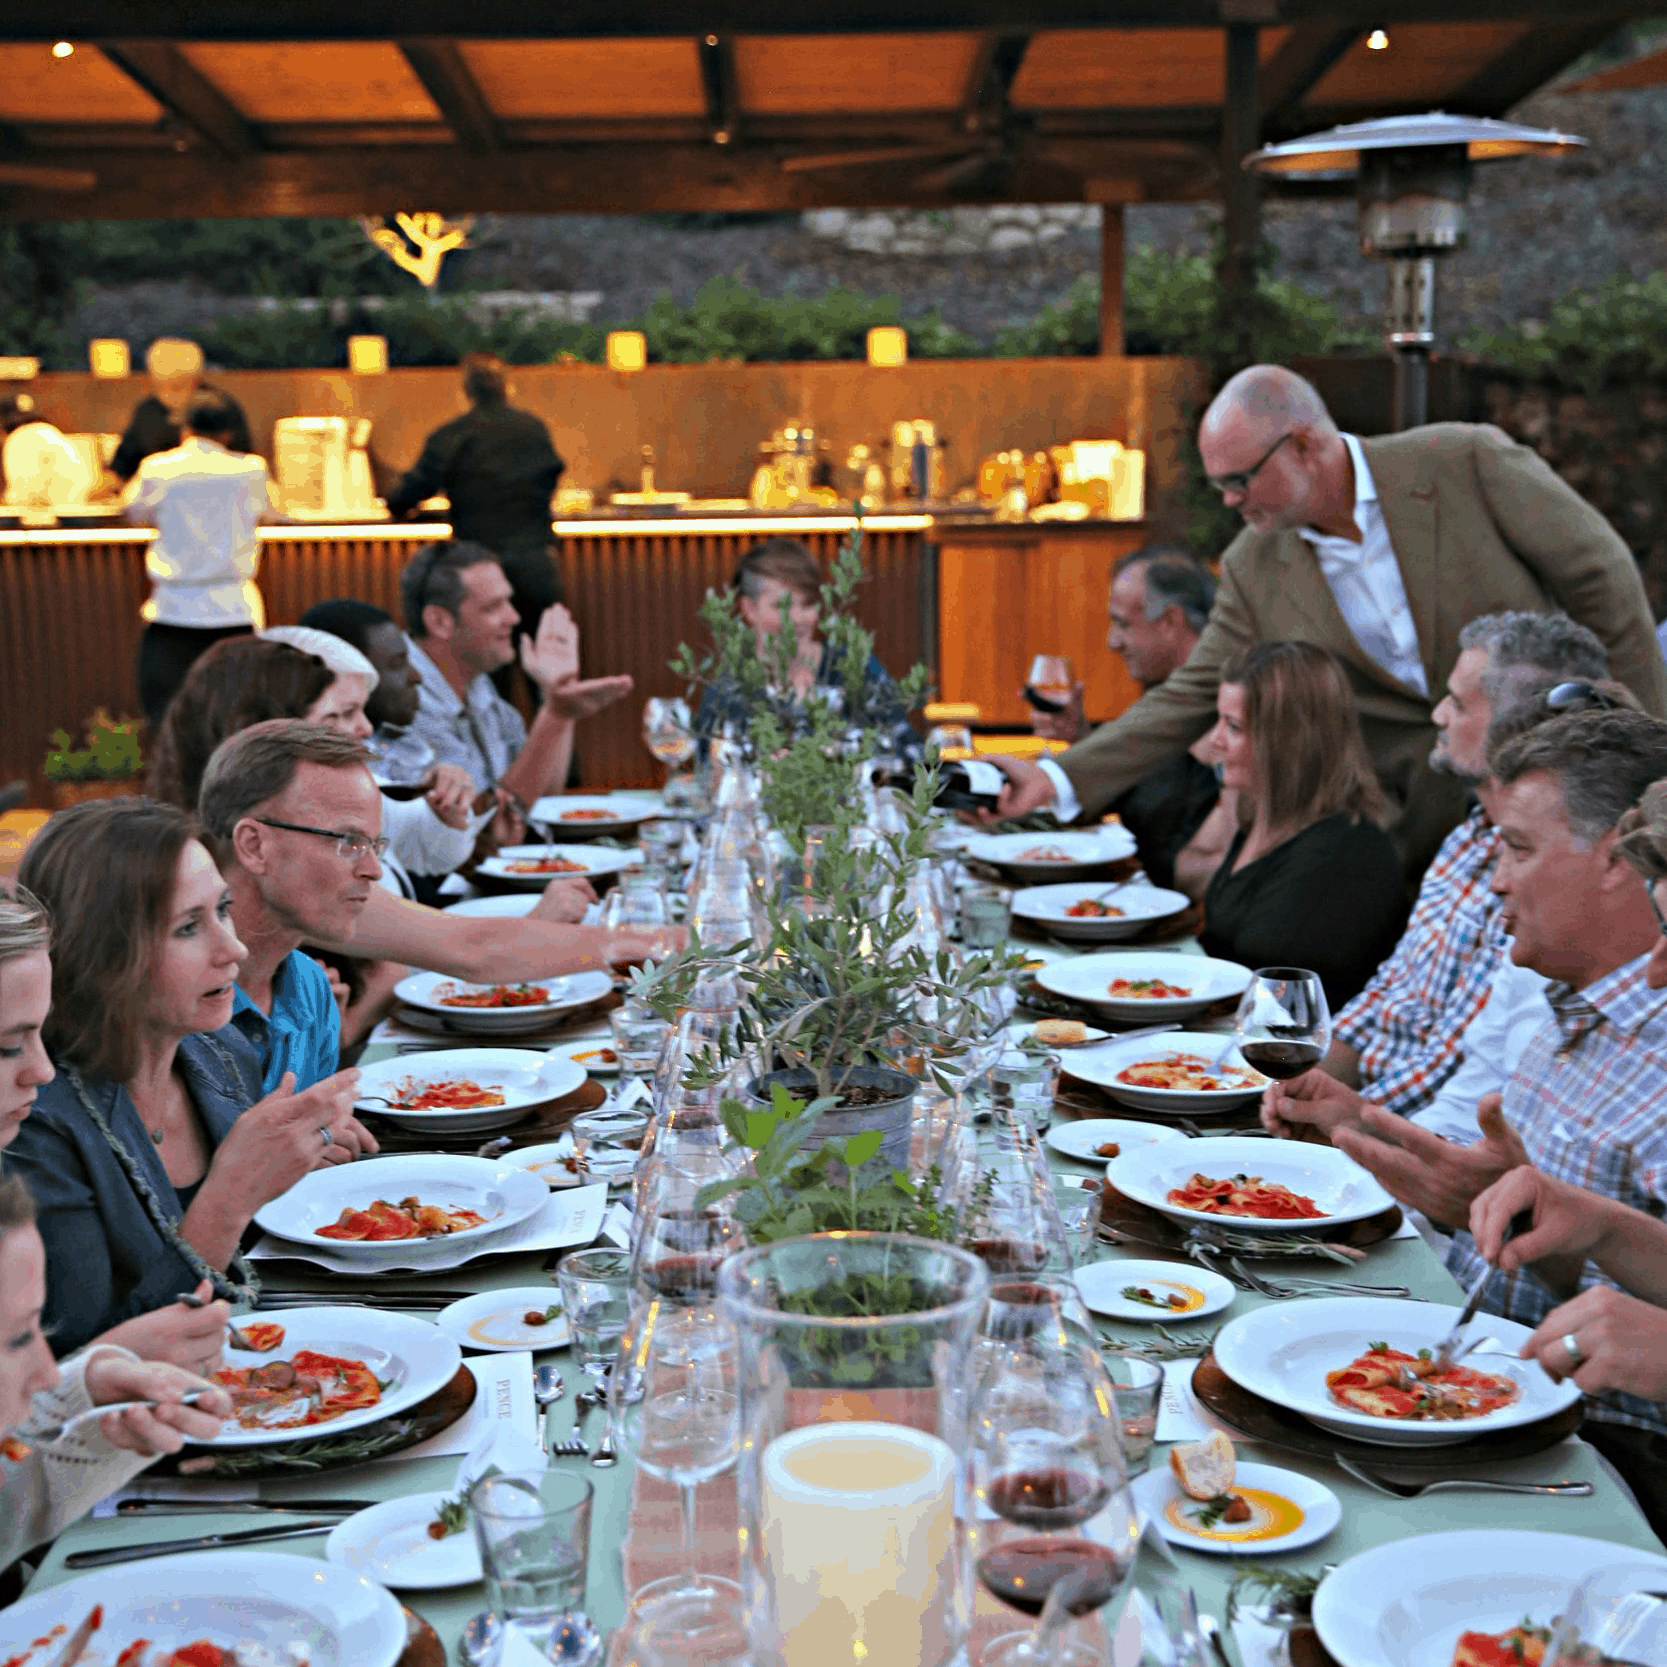 <p>“One of the most appealing aspects of the The Santa Ynez Valley is that each<br />
community has its own culture, offering its unique food and wine experiences.”</p>
